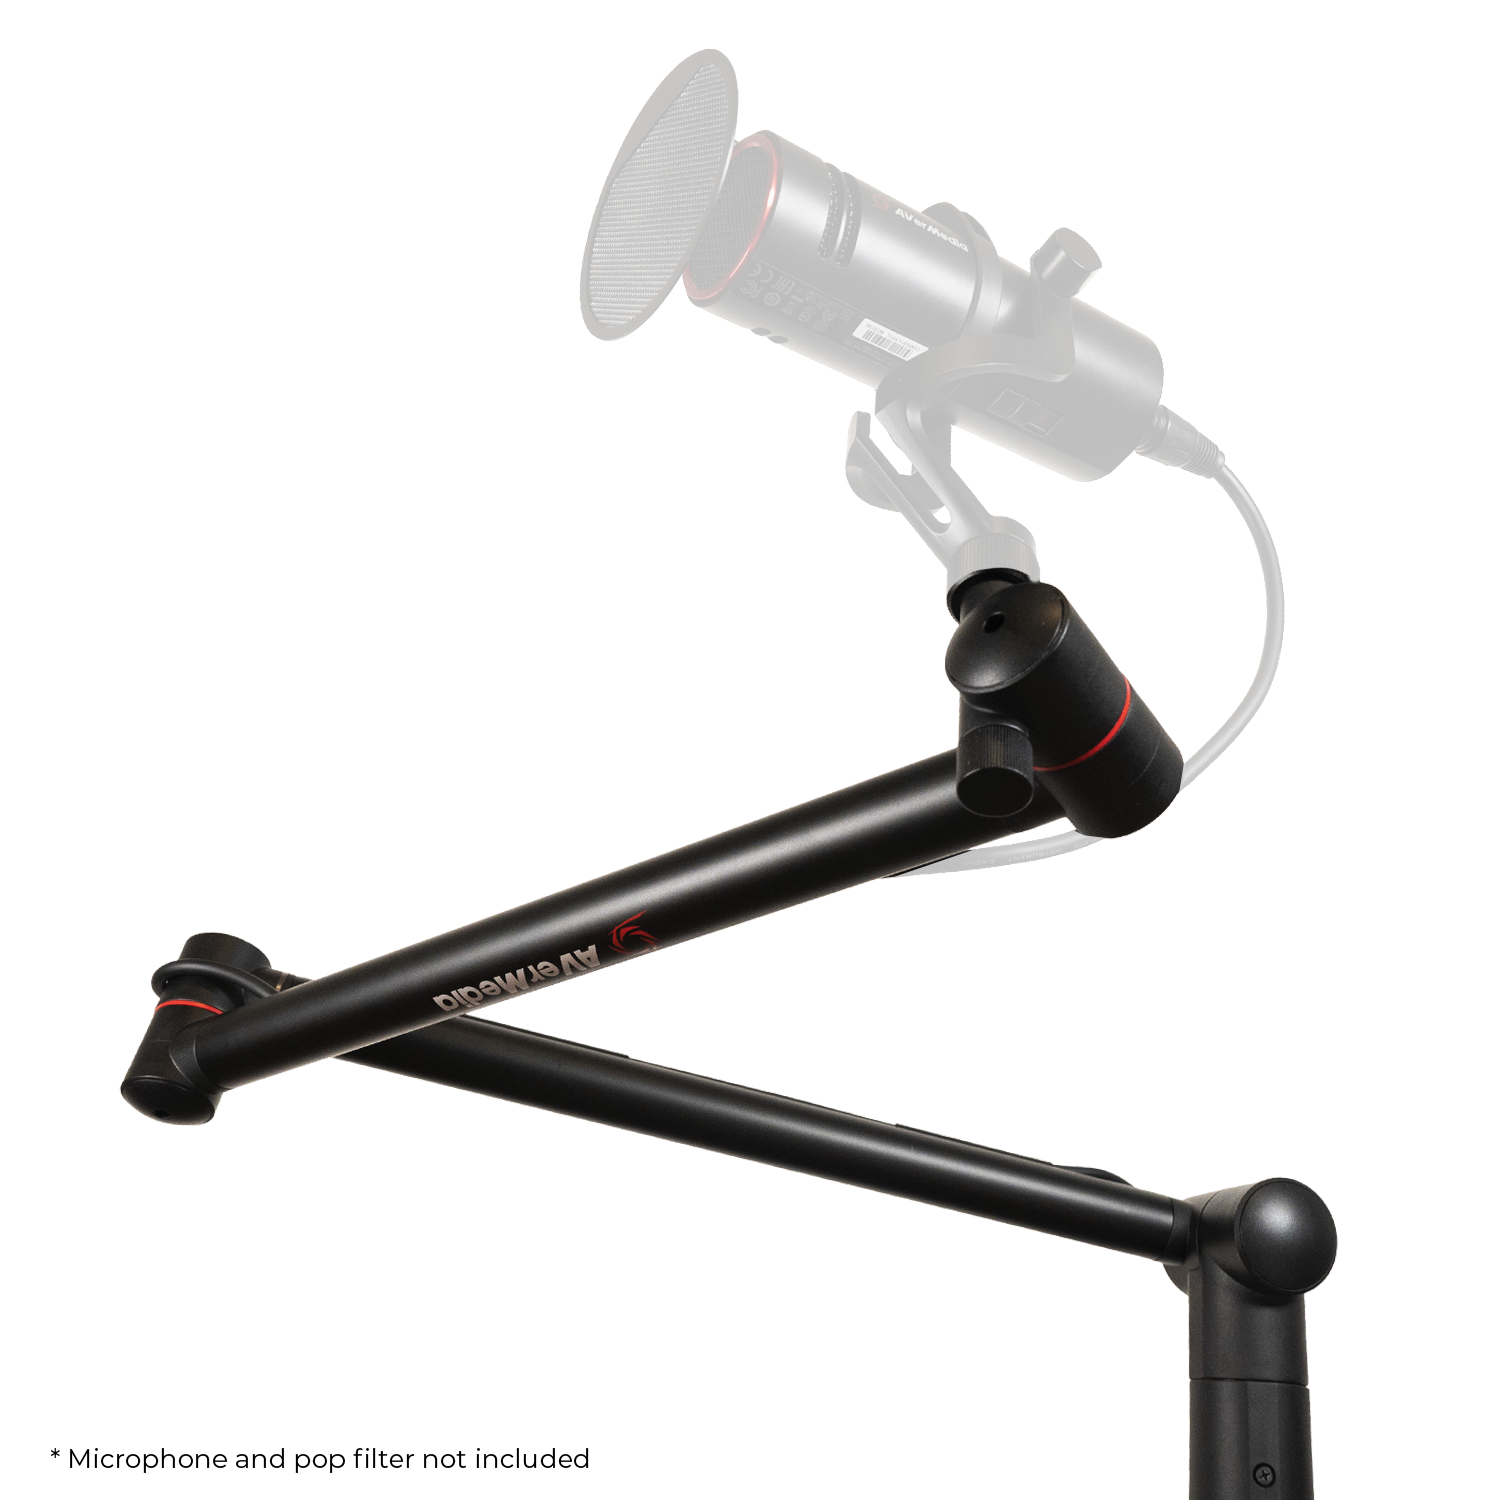 BA311 Adjustable Microphone Boom Arm holding a microphone